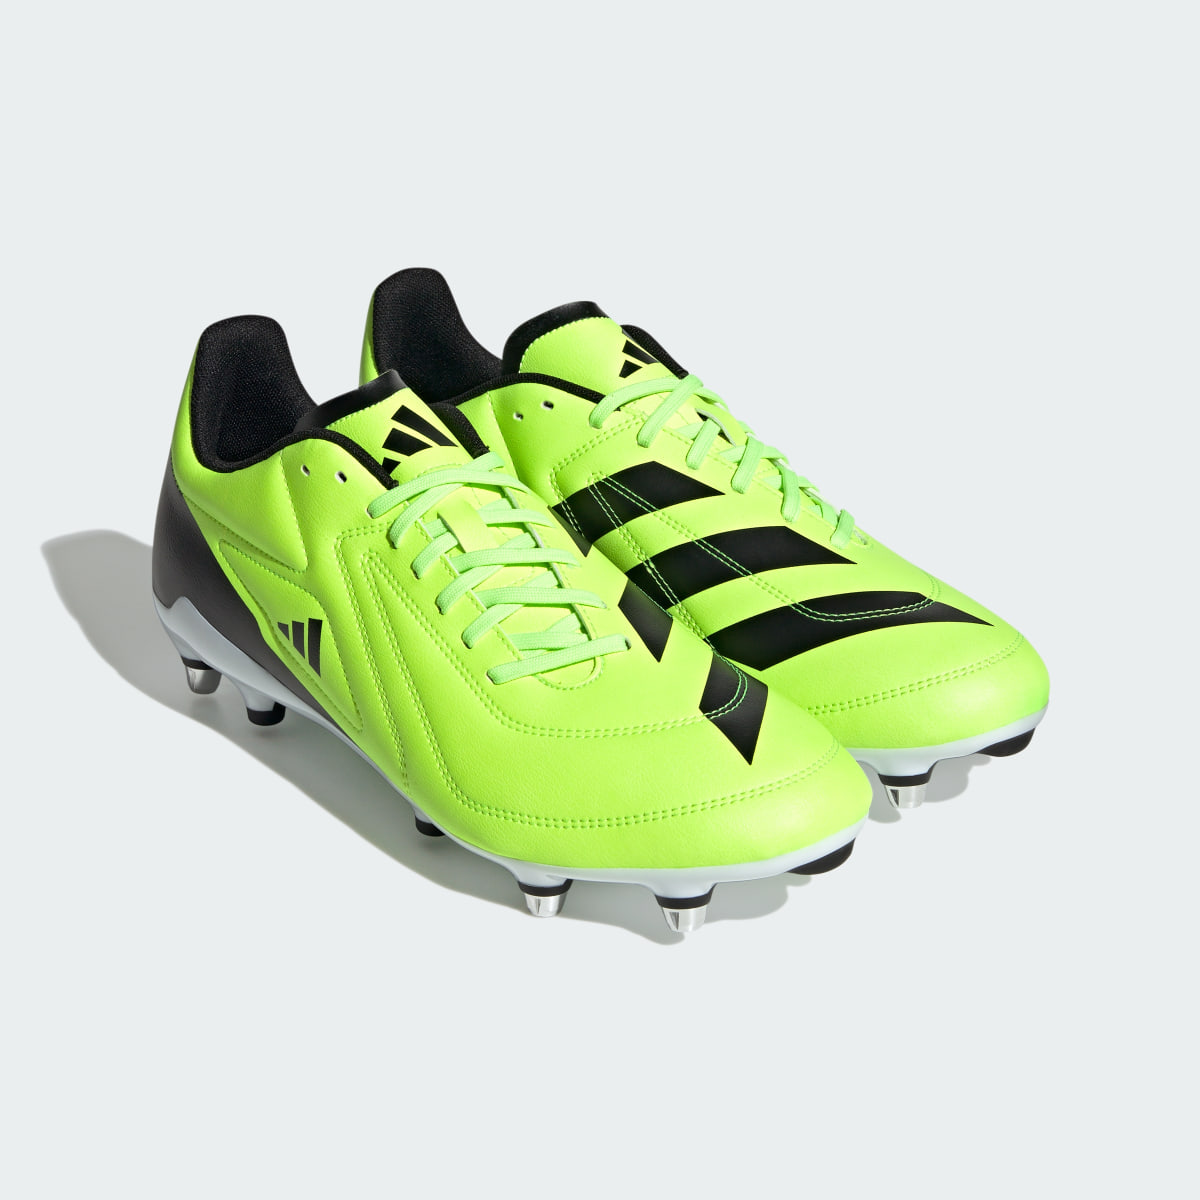 Adidas RS15 Soft Ground Rugby Boots. 8